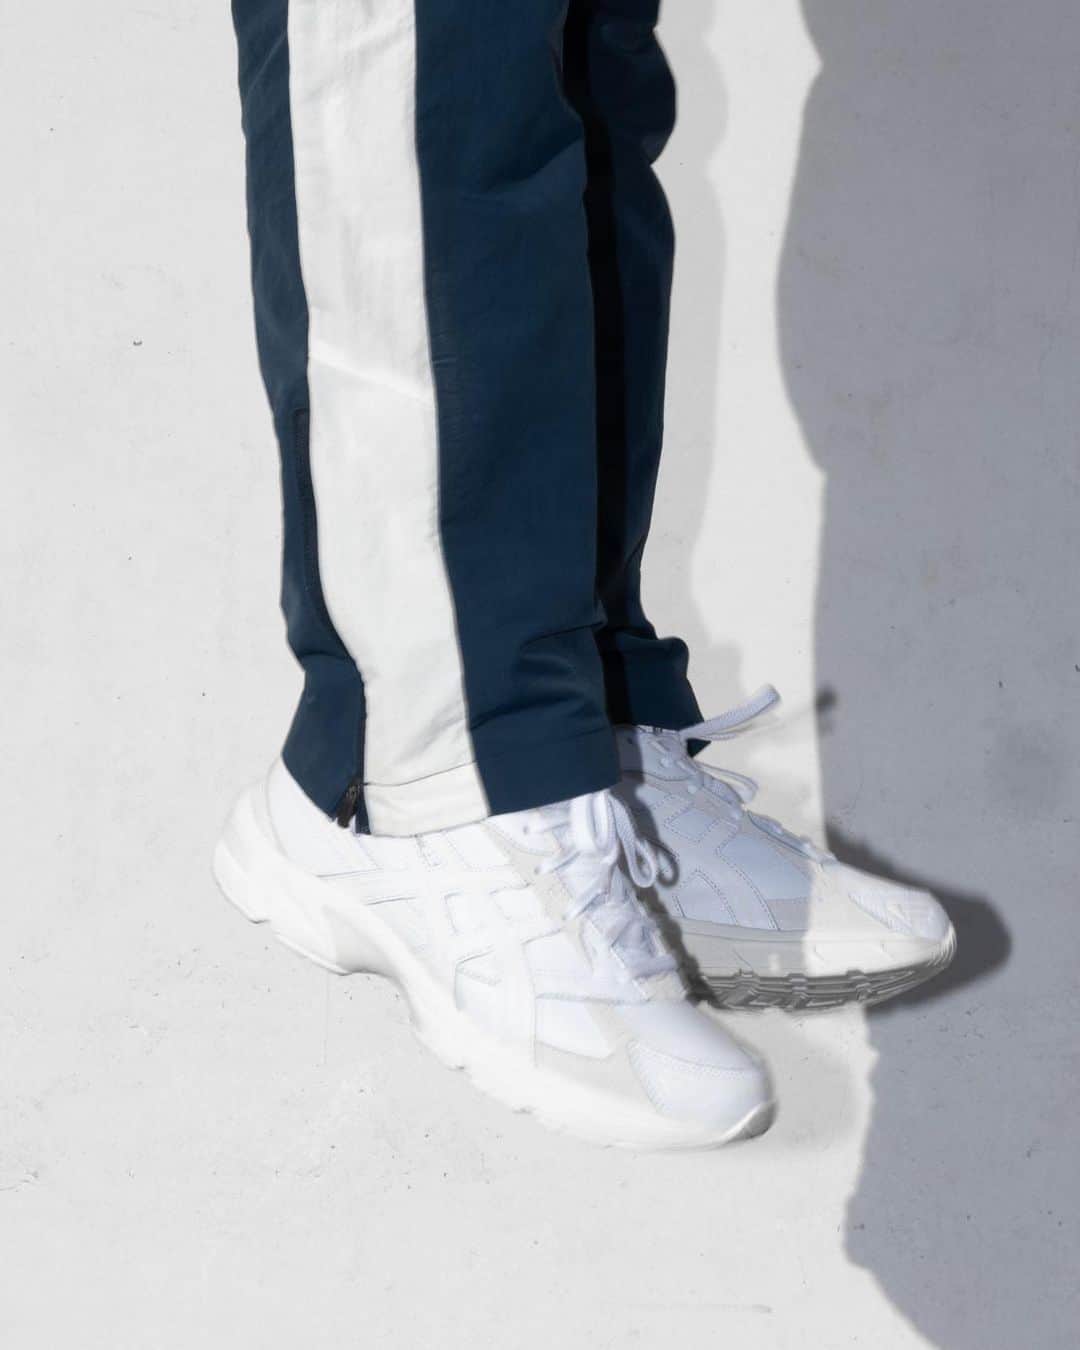 Titoloのインスタグラム：「No matter where you're headed, the all-white GEL-1130™️ has you covered. Its traditional materials have been updated with suede inserts and leather overlays, giving the retro running shoe a modern look. Pair it with the new ASICS tracksuit and you're good to go.  Shop it now @doodahstore instore & online  #asics #asicsgel #sneaker #sneakers #doodah #montanasportstyle #doodahstore #outdoor #sneakerhead #switzerland #asicssneakers #skateboard #fashion #shoes #kickstagram #skatestyle #kicks #runner #gel1130 #style #hypebeast #skate #streetwear #sneakerheads #asicsswitzerland」